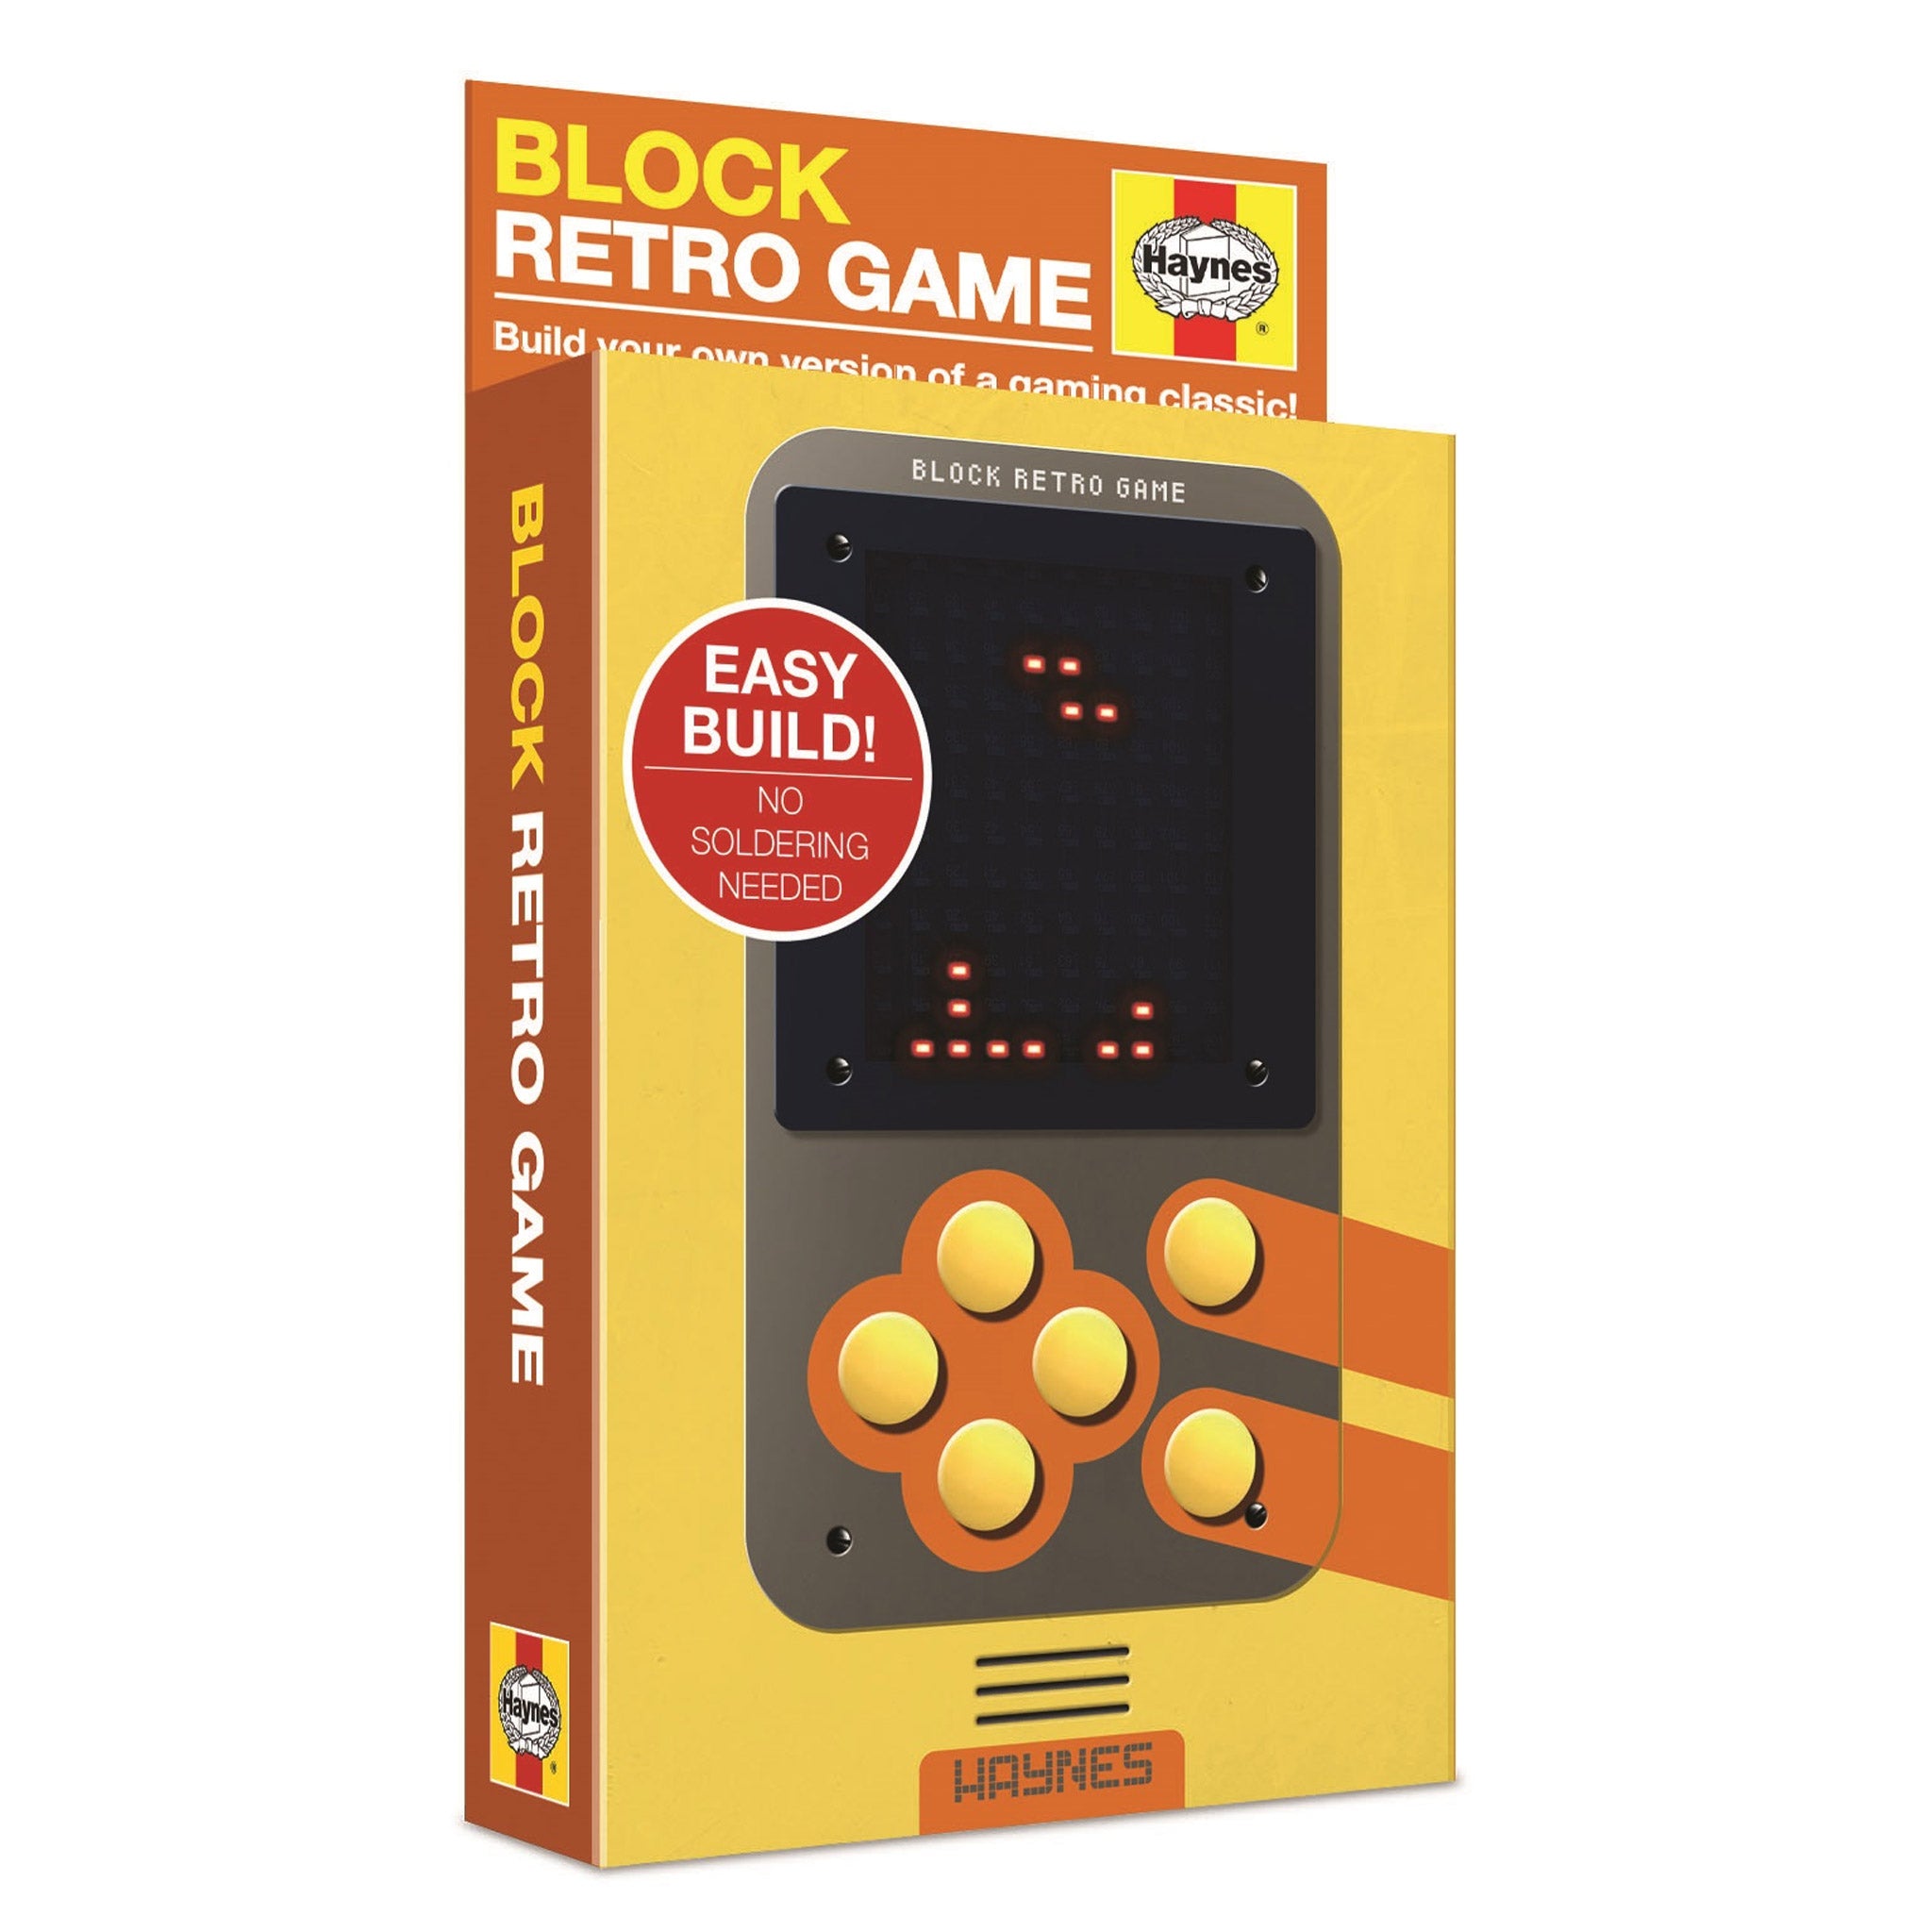 A packshot image of the Build Your Own Block Retro Game craft kit.